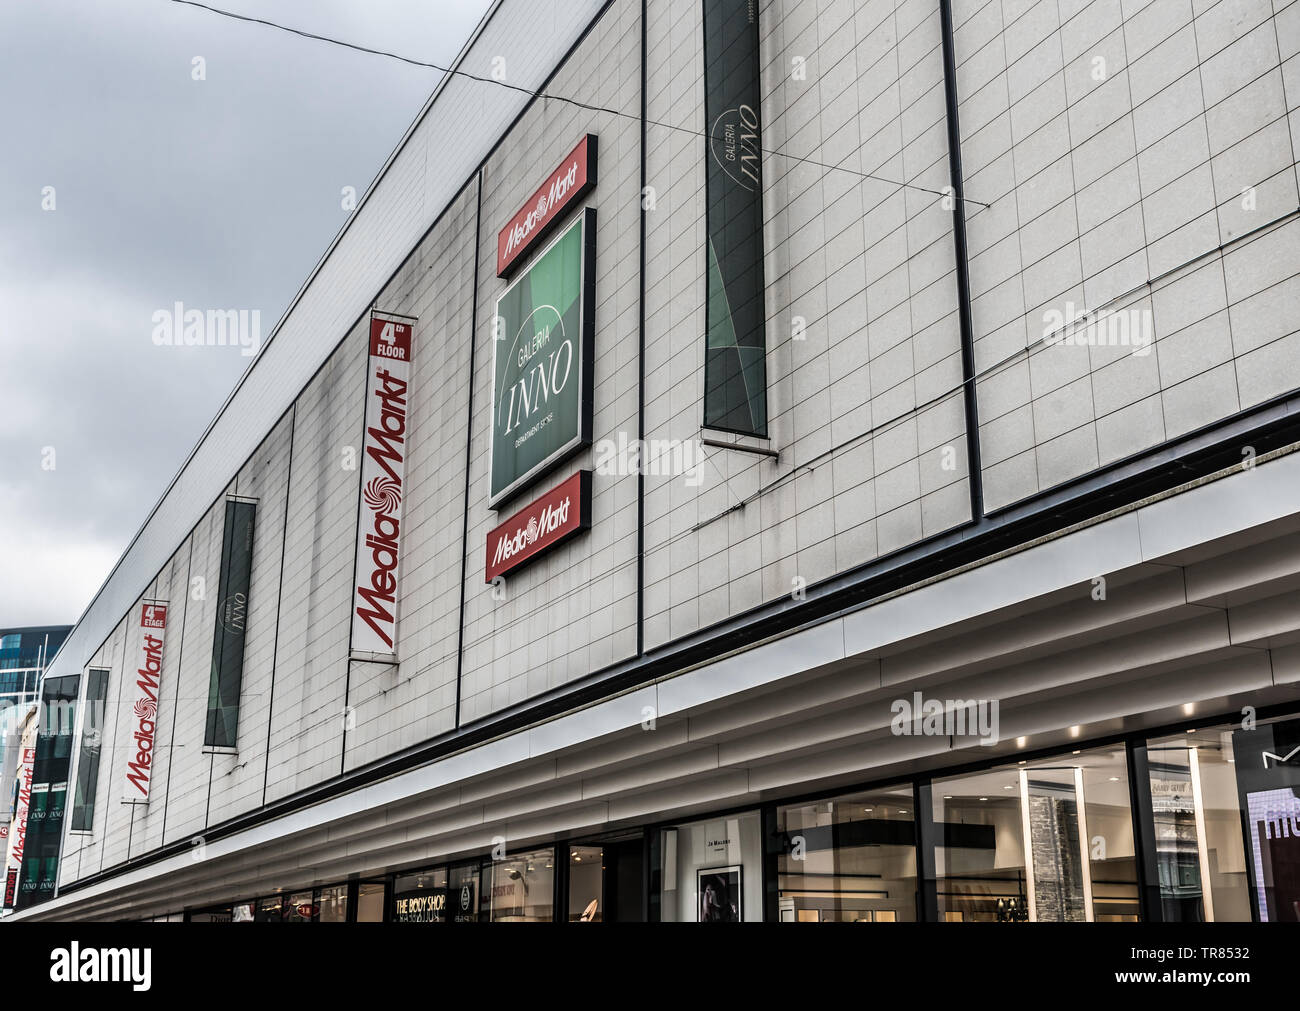 Brussels Old Town - Belgium - People Walking Along the Mediamarkt  Electronics Concern in the Rue Neuve, the Main Shopping Street Editorial  Stock Photo - Image of logo, area: 243000343